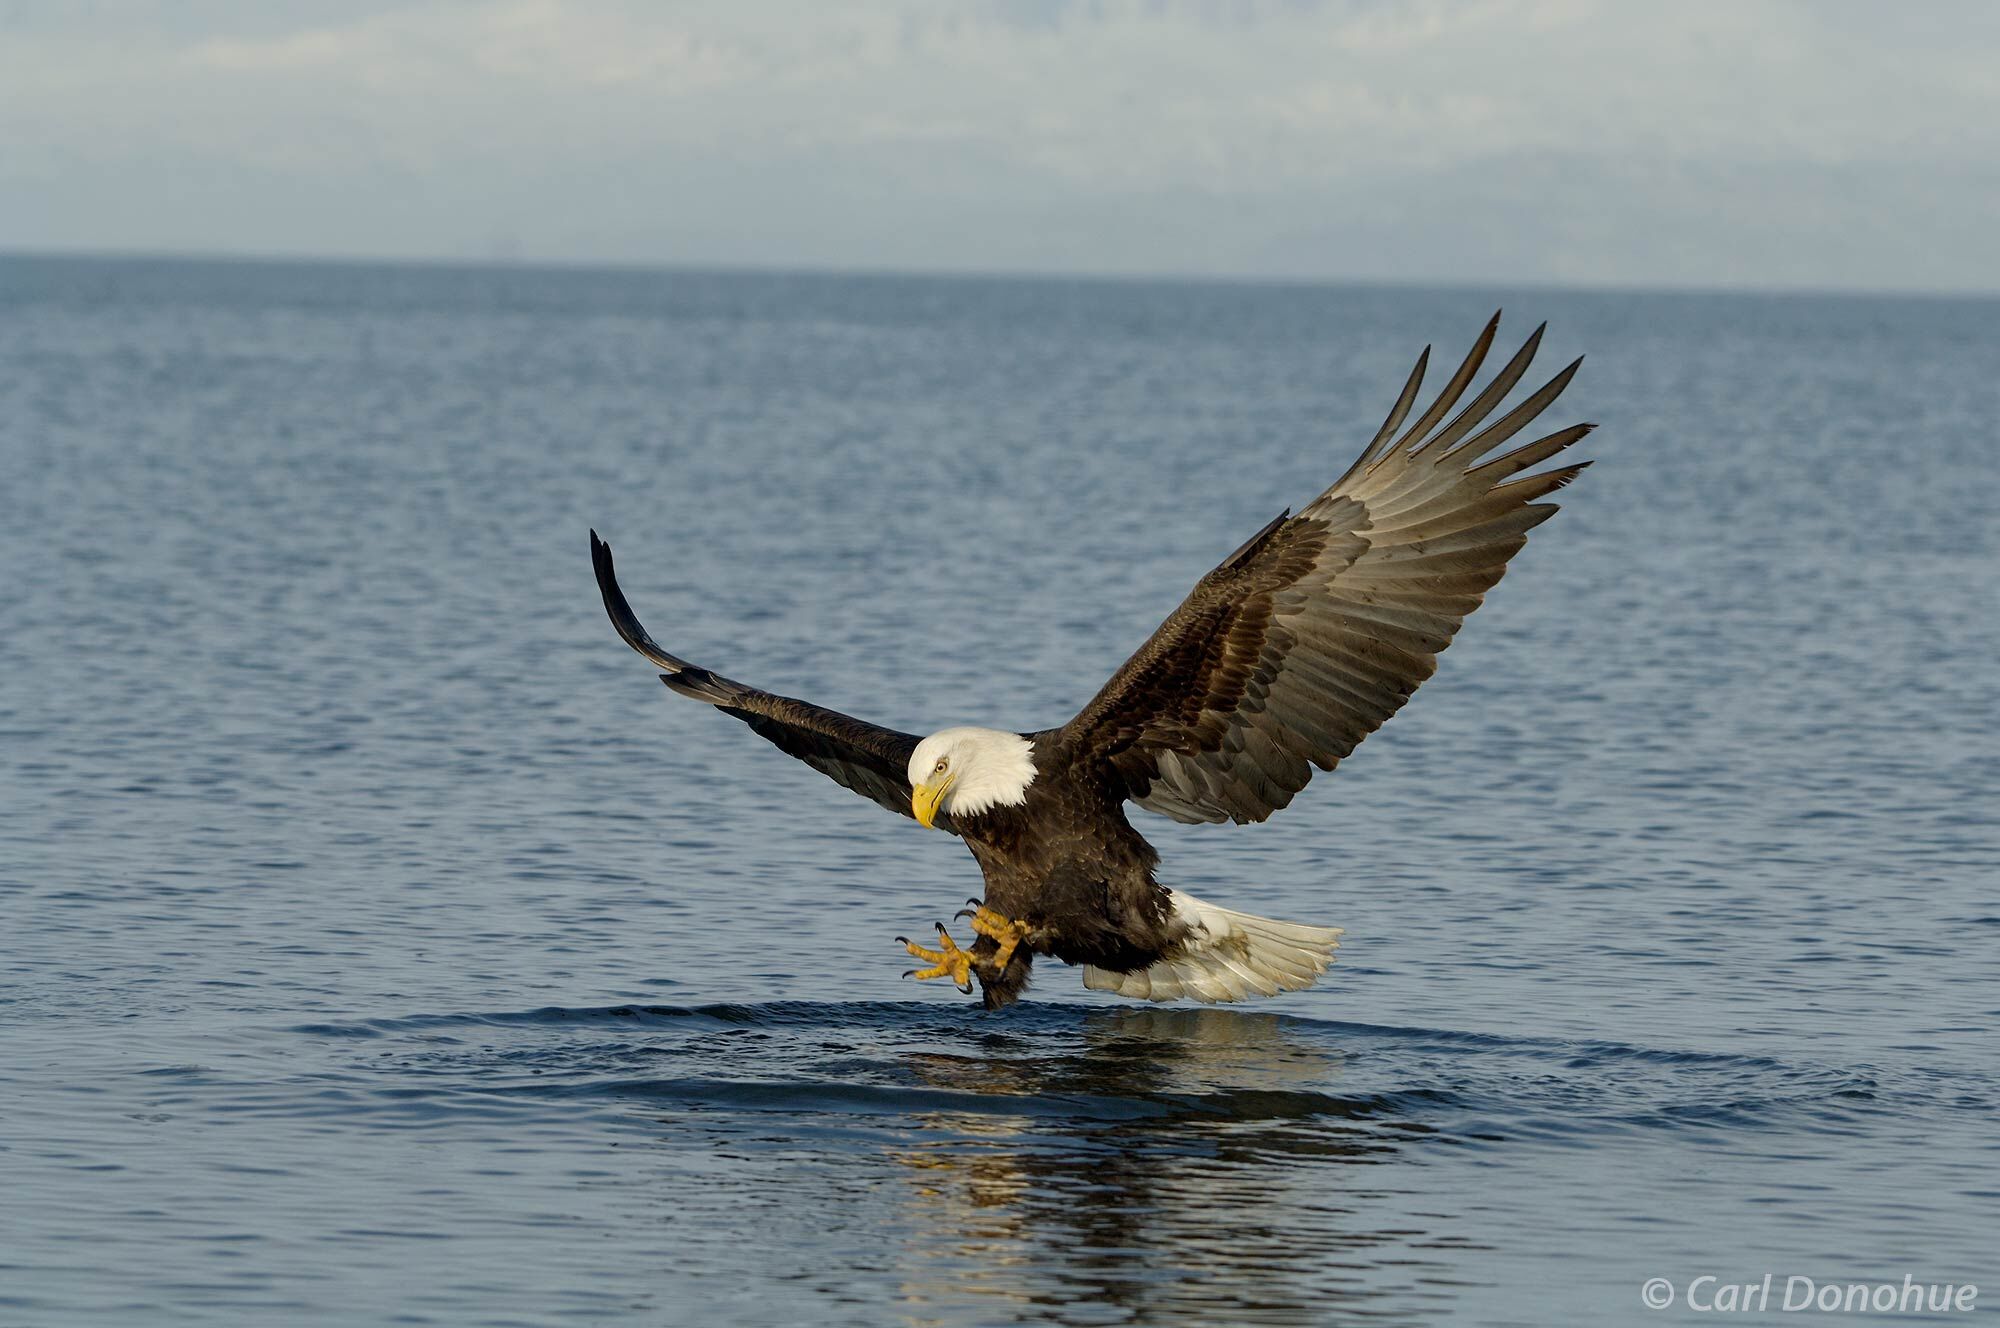 The bald eagle's keen eyesight allows it to spot a fish swimming below, and it quickly swoops down to make the catch. Bald eagle...